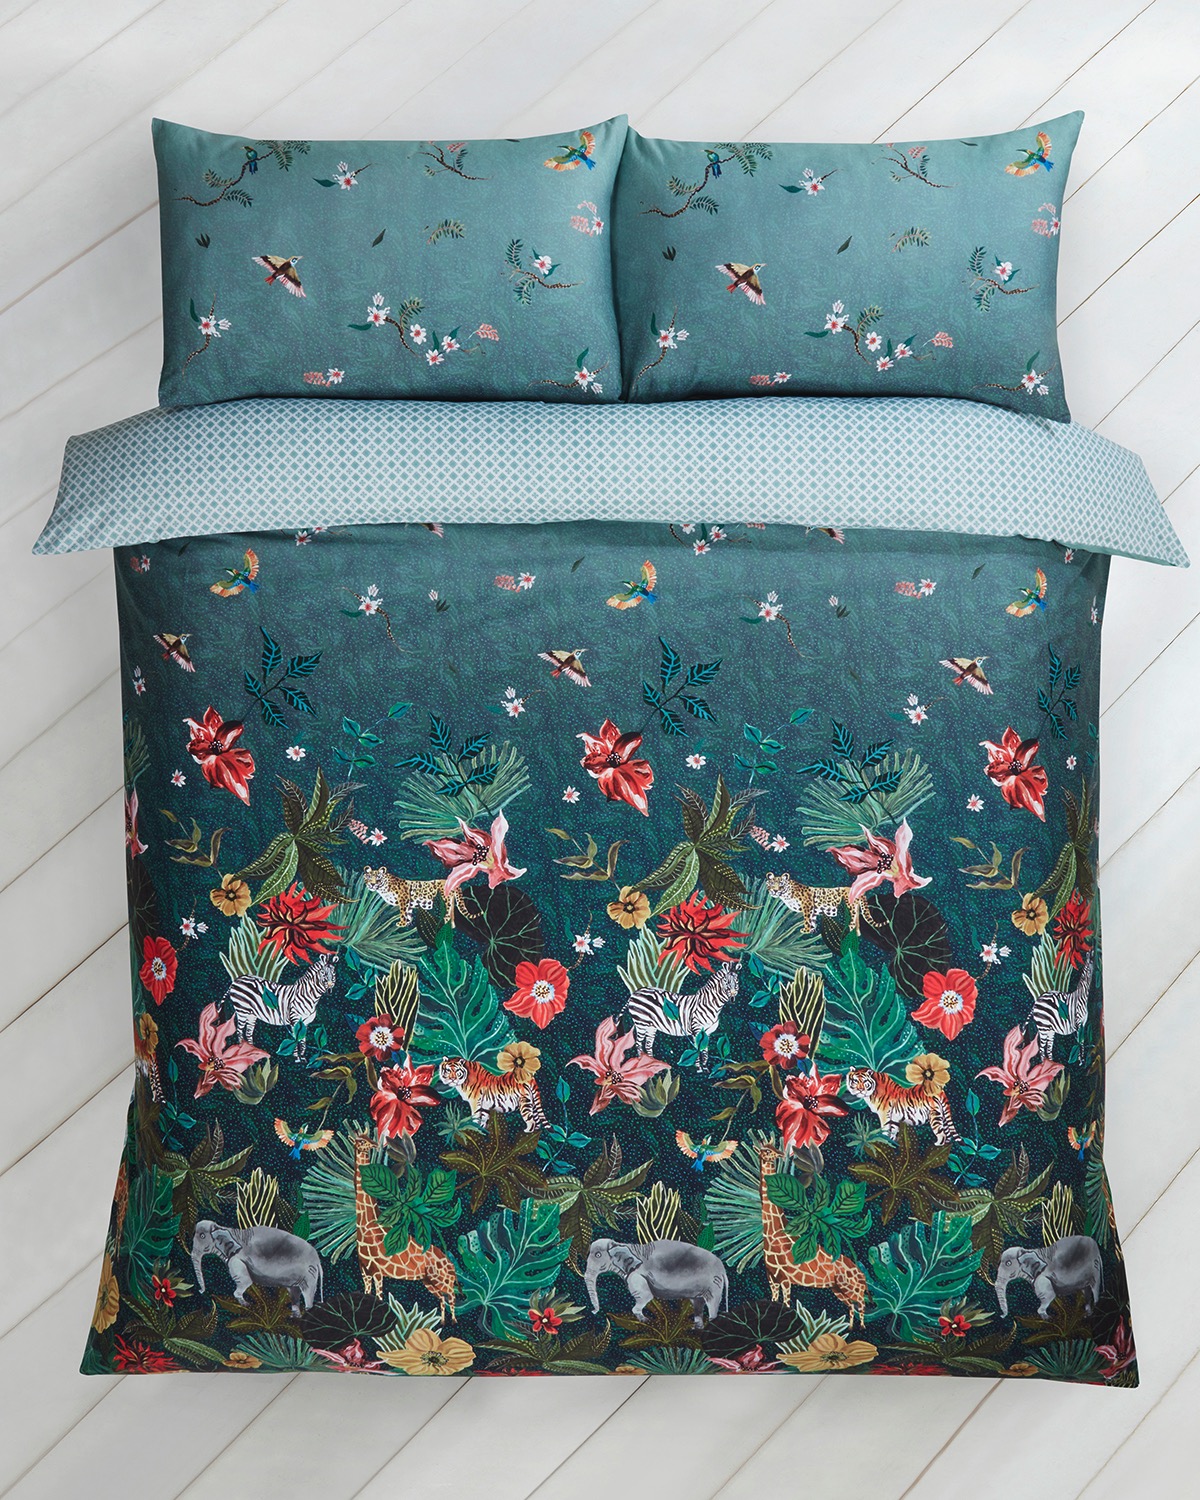 Dunnes Stores Multi Carolyn Donnelly Eclectic Borneo Duvet Set